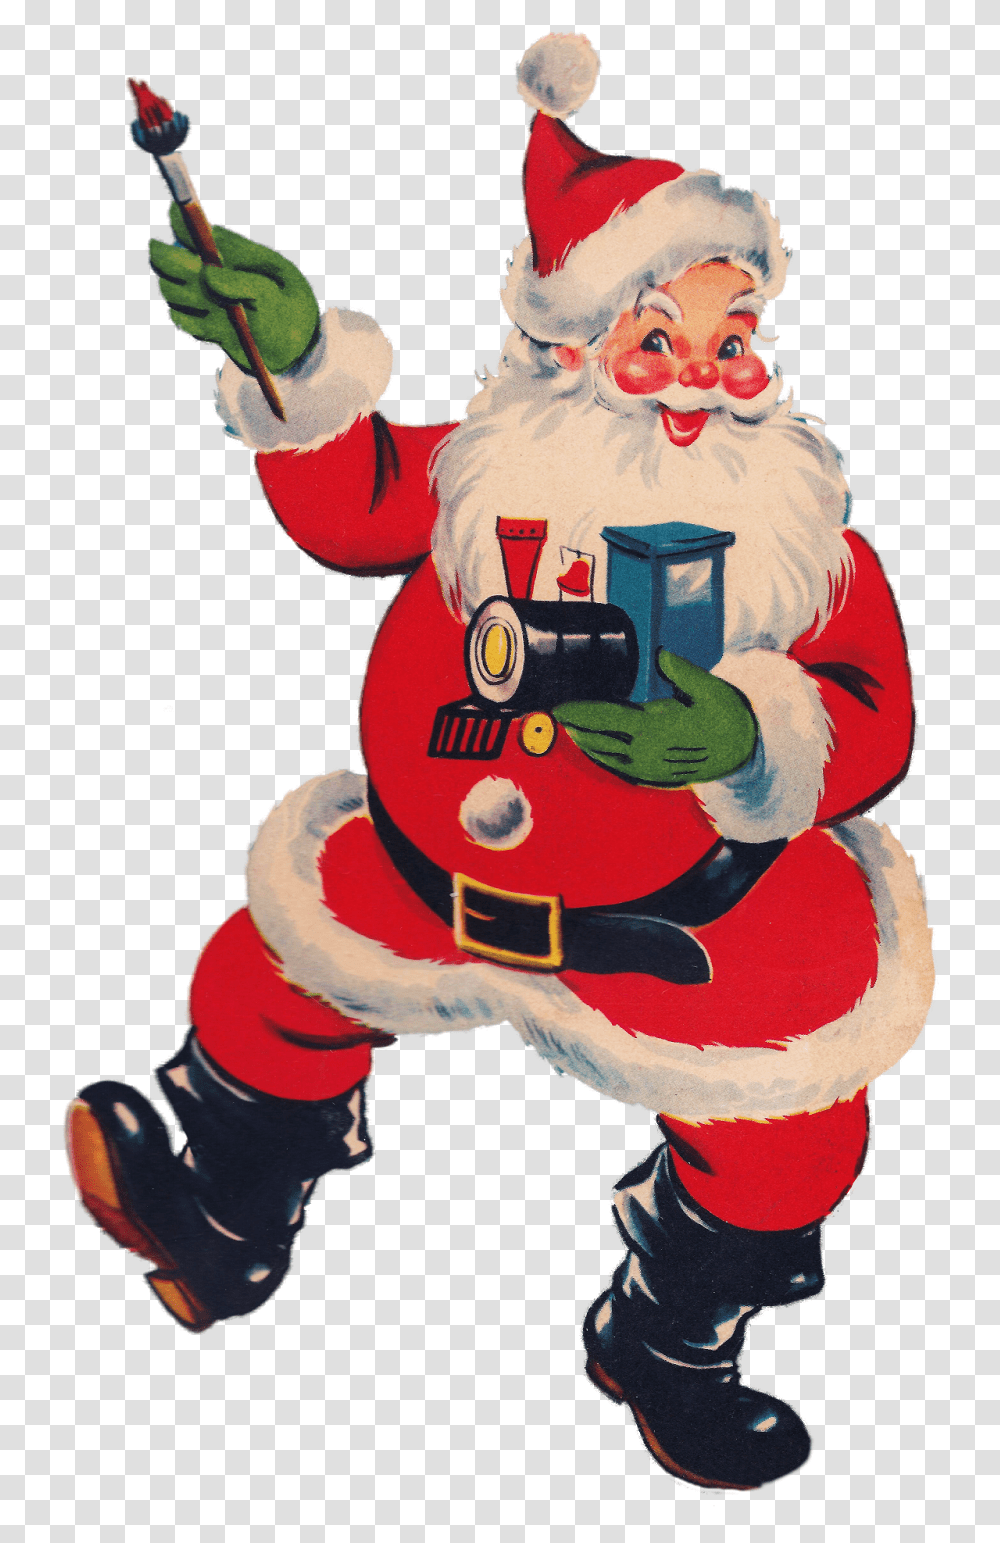 Making Merry For Over 25 Visitors Christmas Clipart Christmas Clipart Vintage Santa, Mascot, Performer, Nutcracker, Astronaut Transparent Png